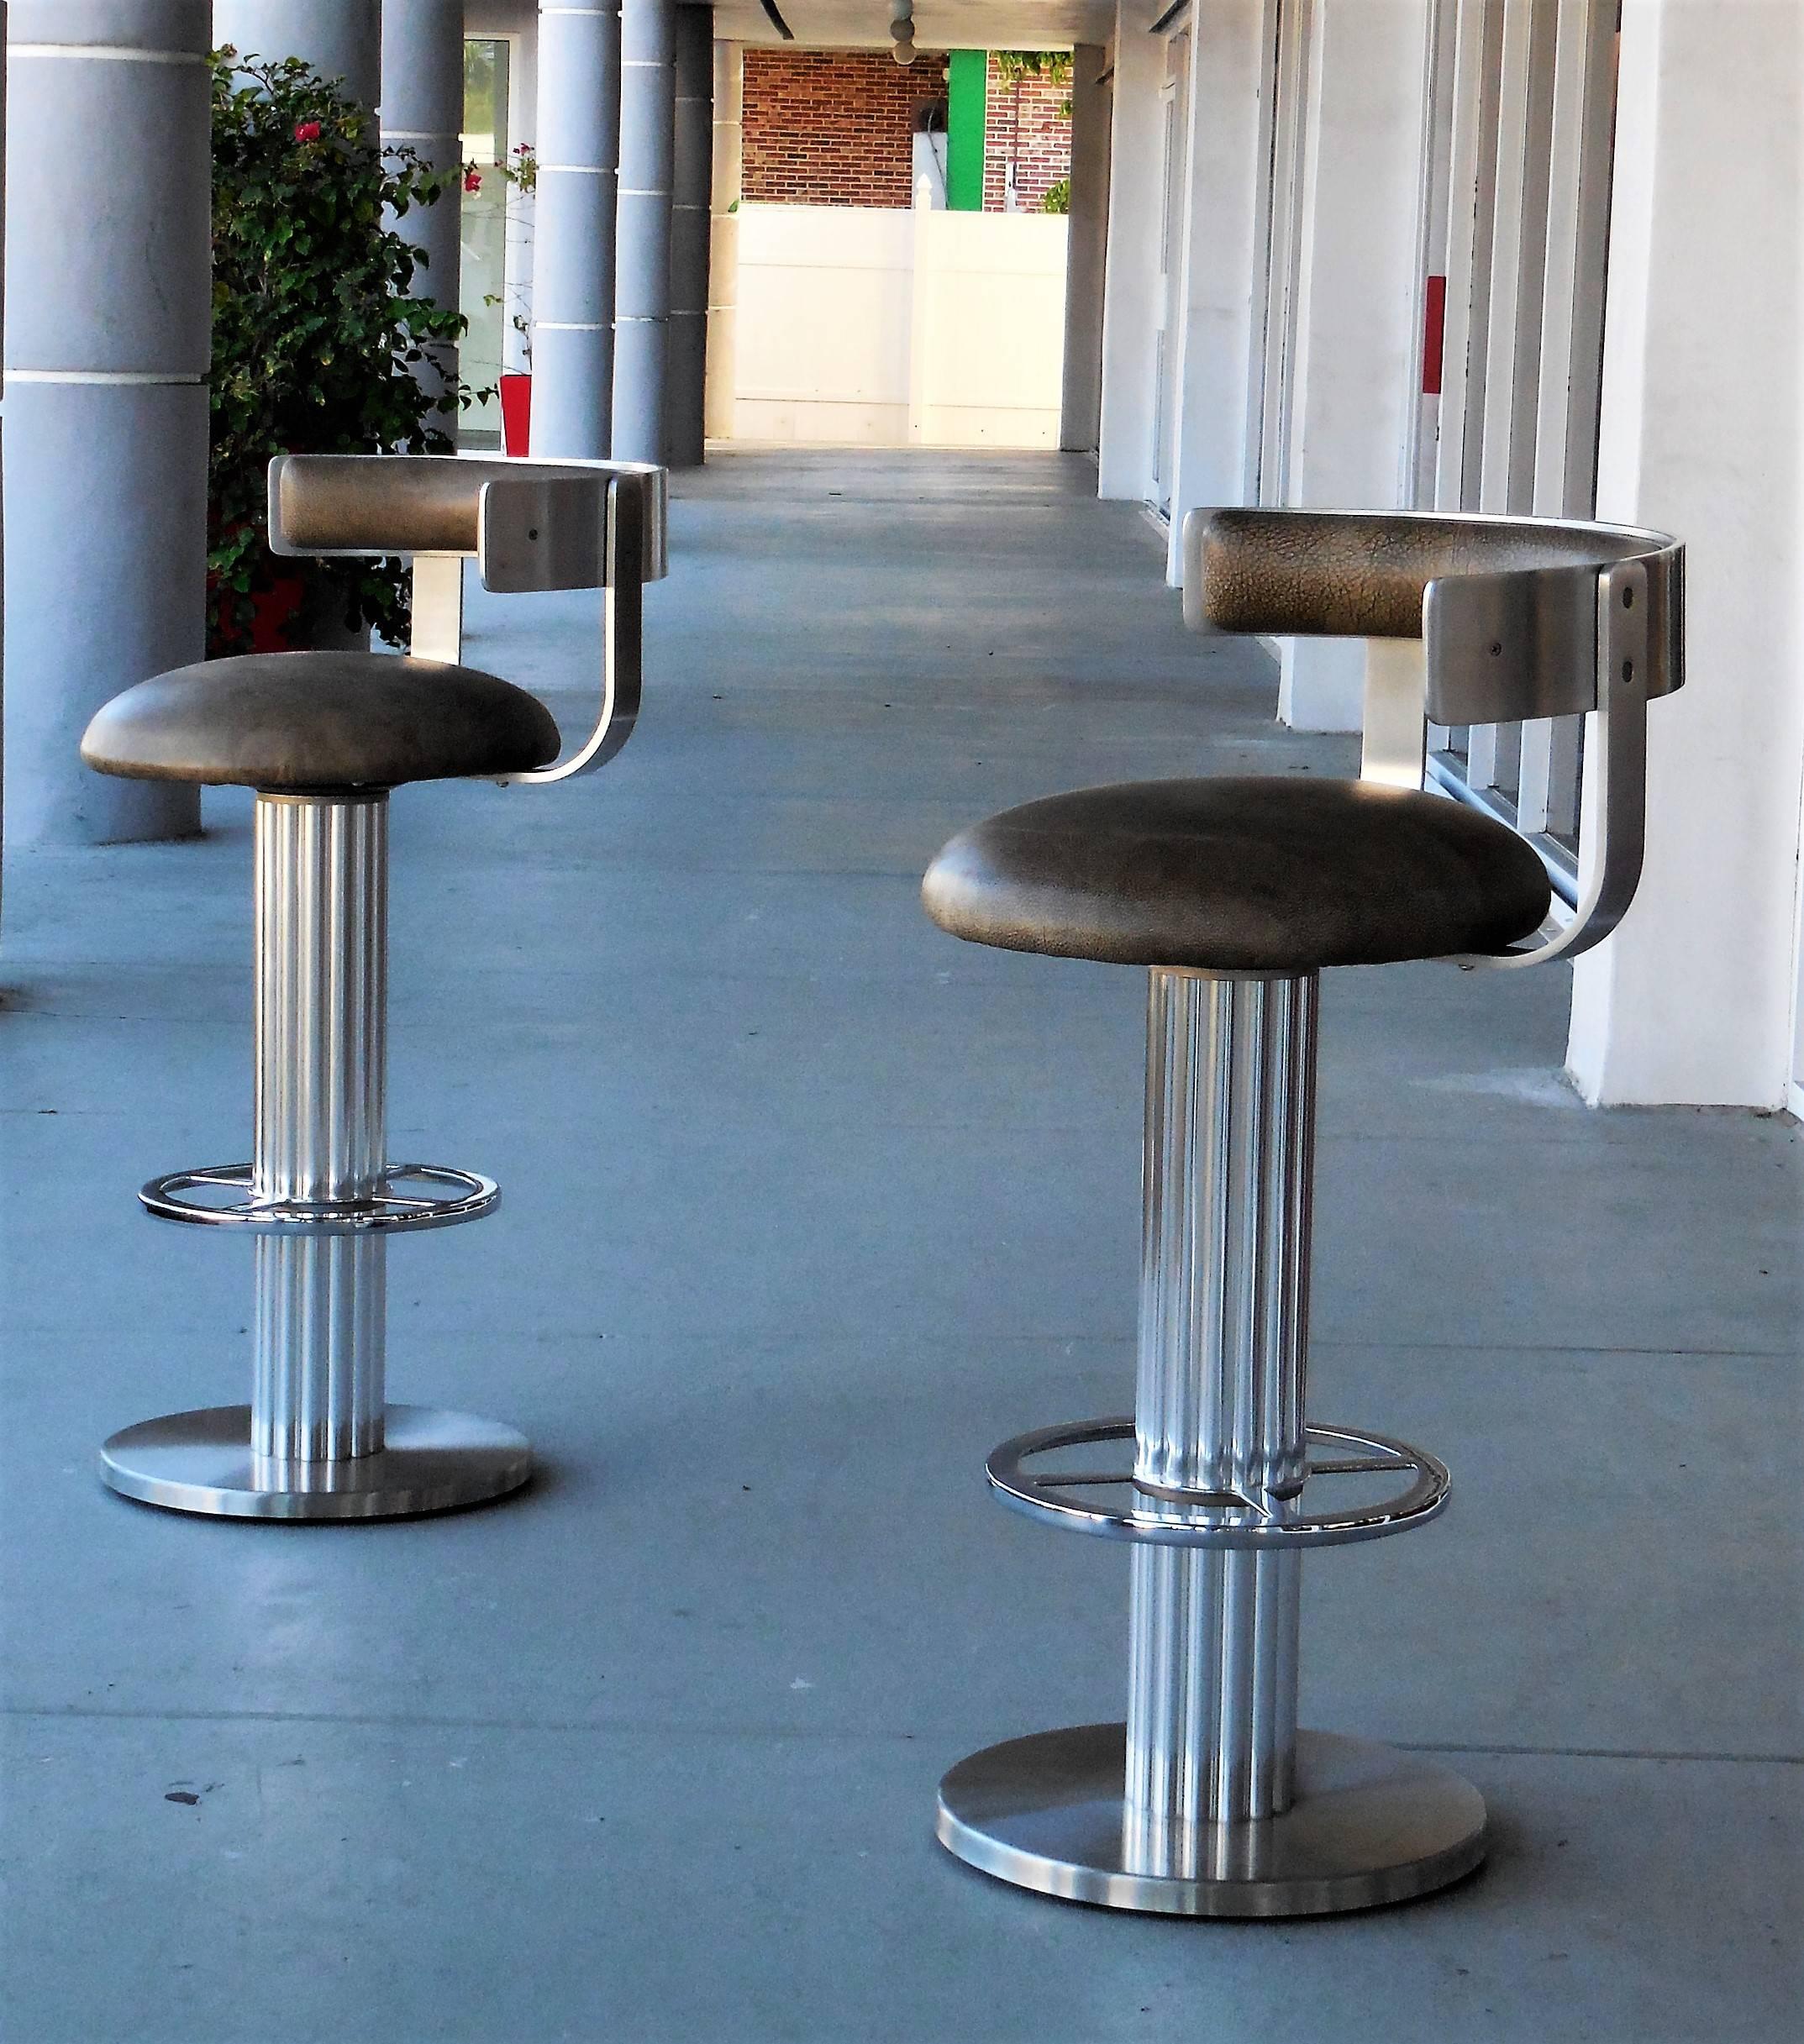 Pair of bar stools by Design for Leisure. The bases are a combination of polished and brushed stainless steel. Wide round leather seats and backs.